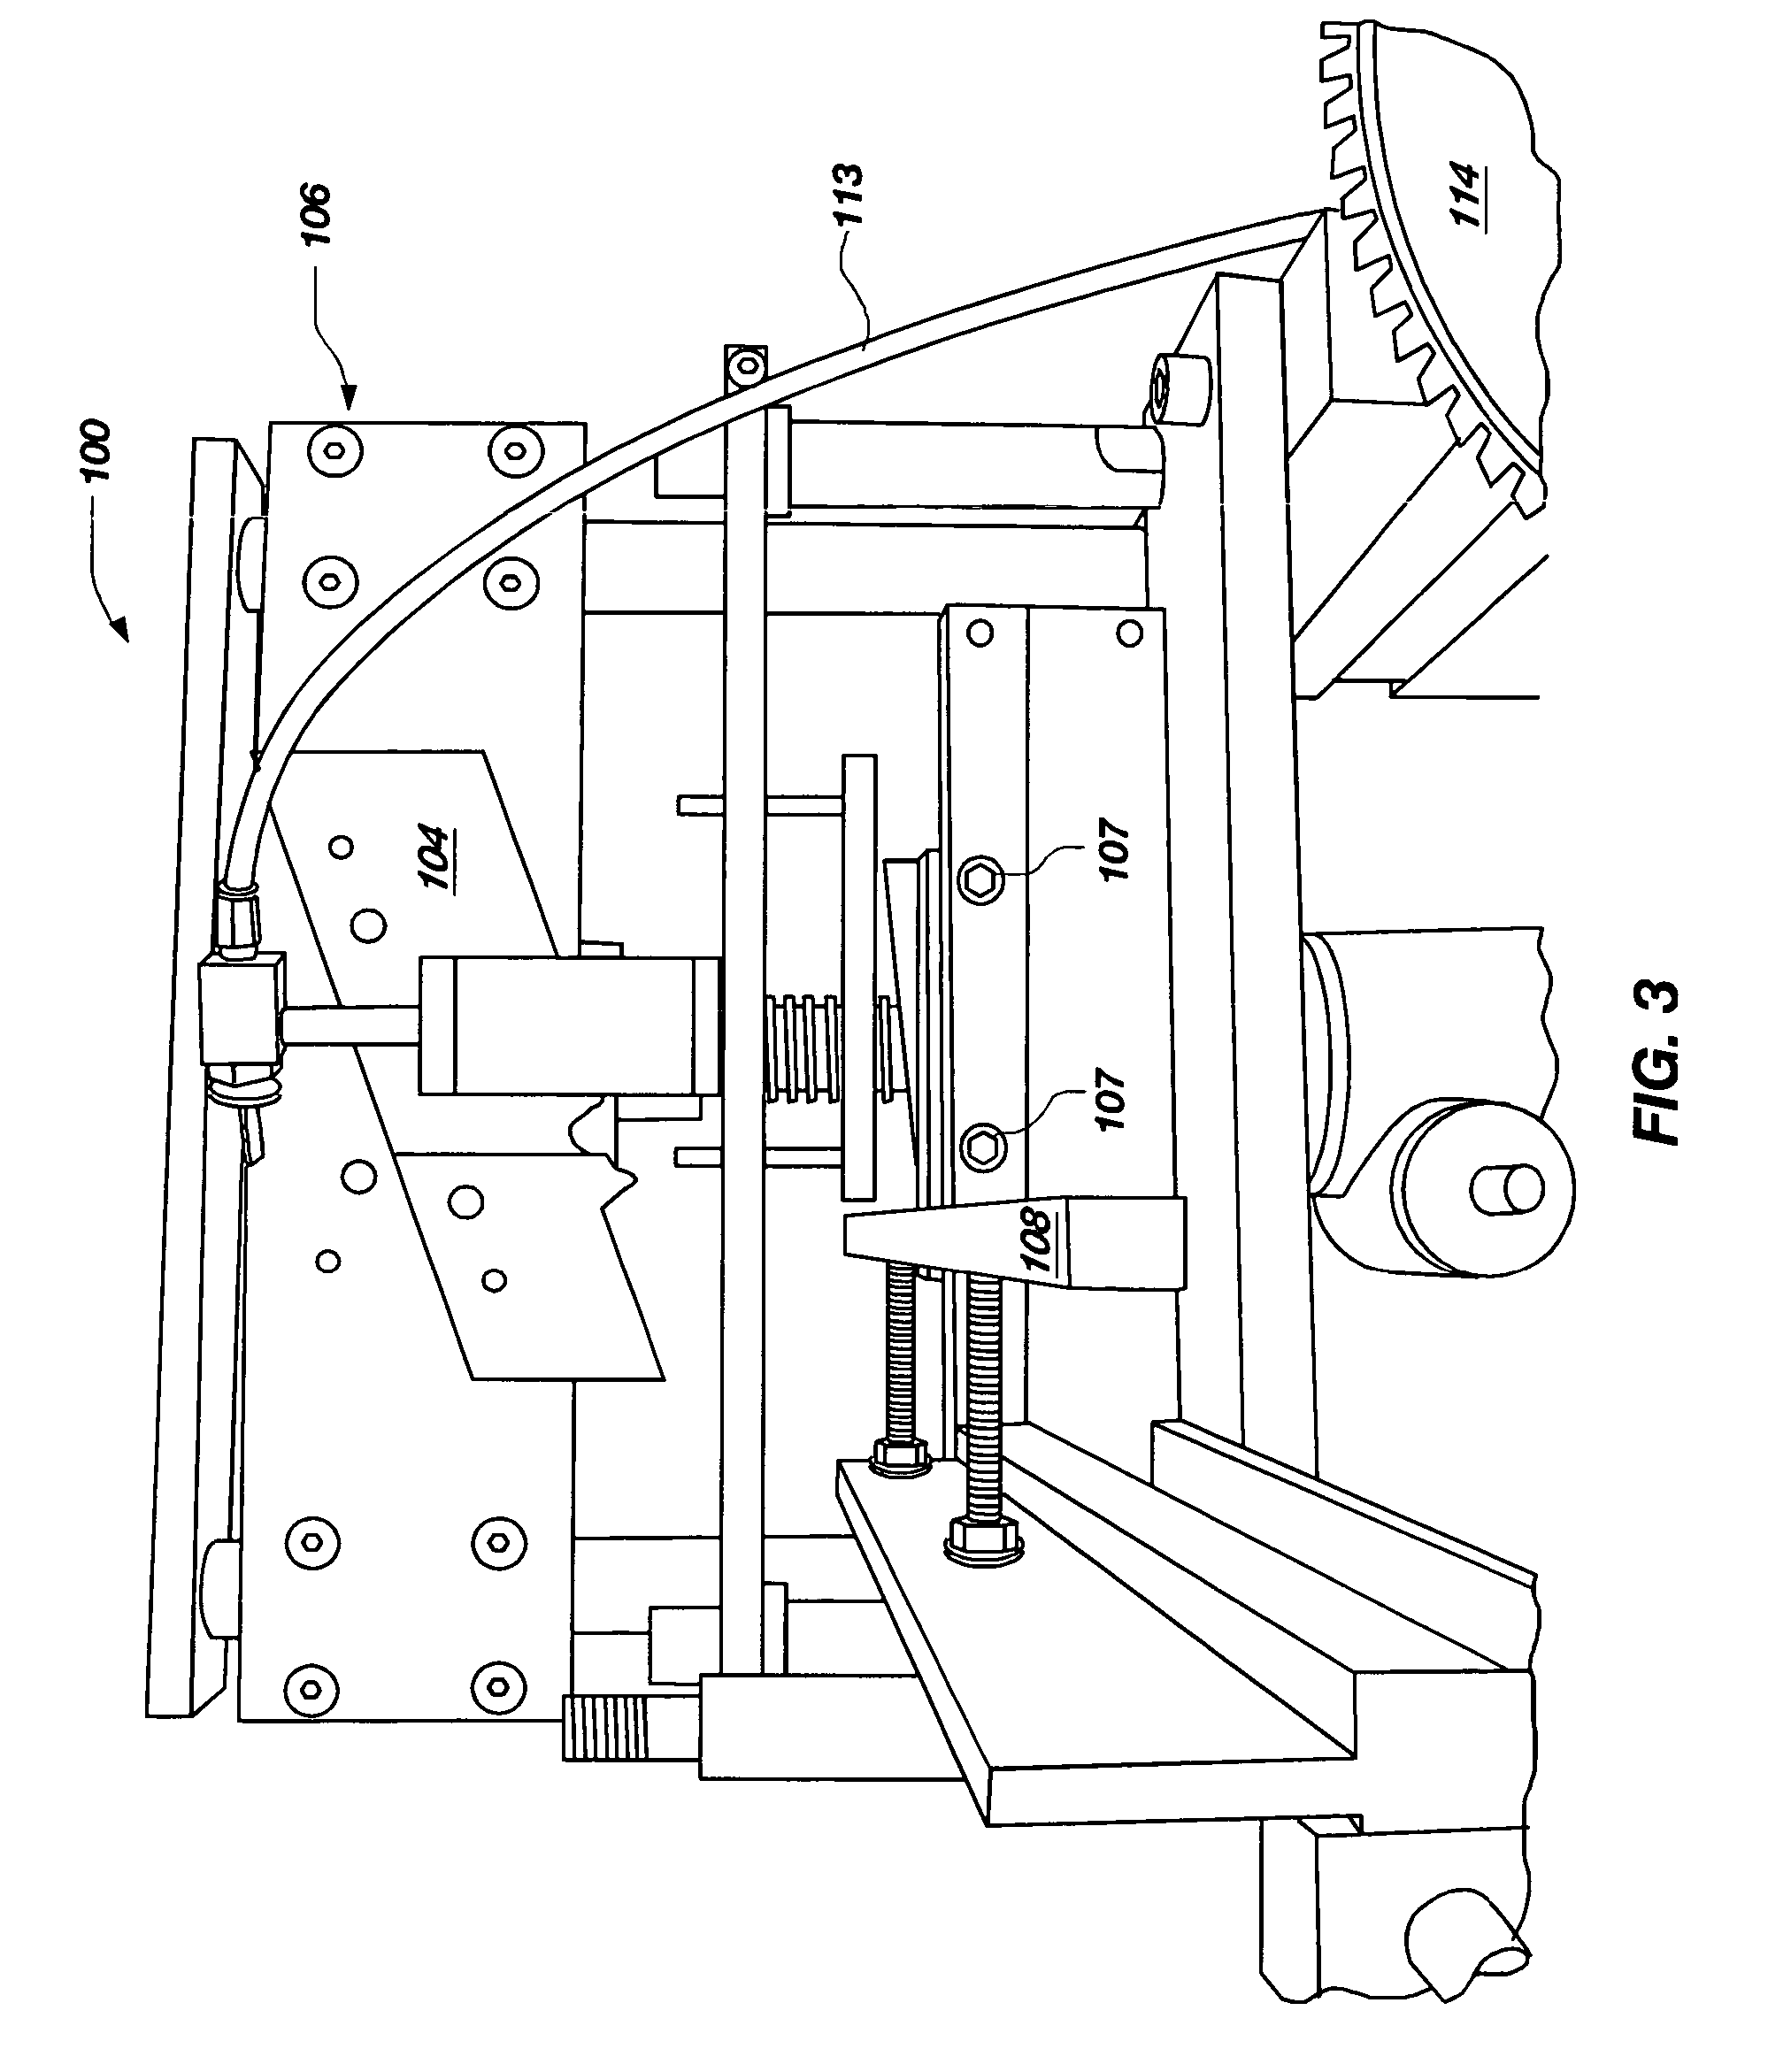 Coping apparatus and method of operation